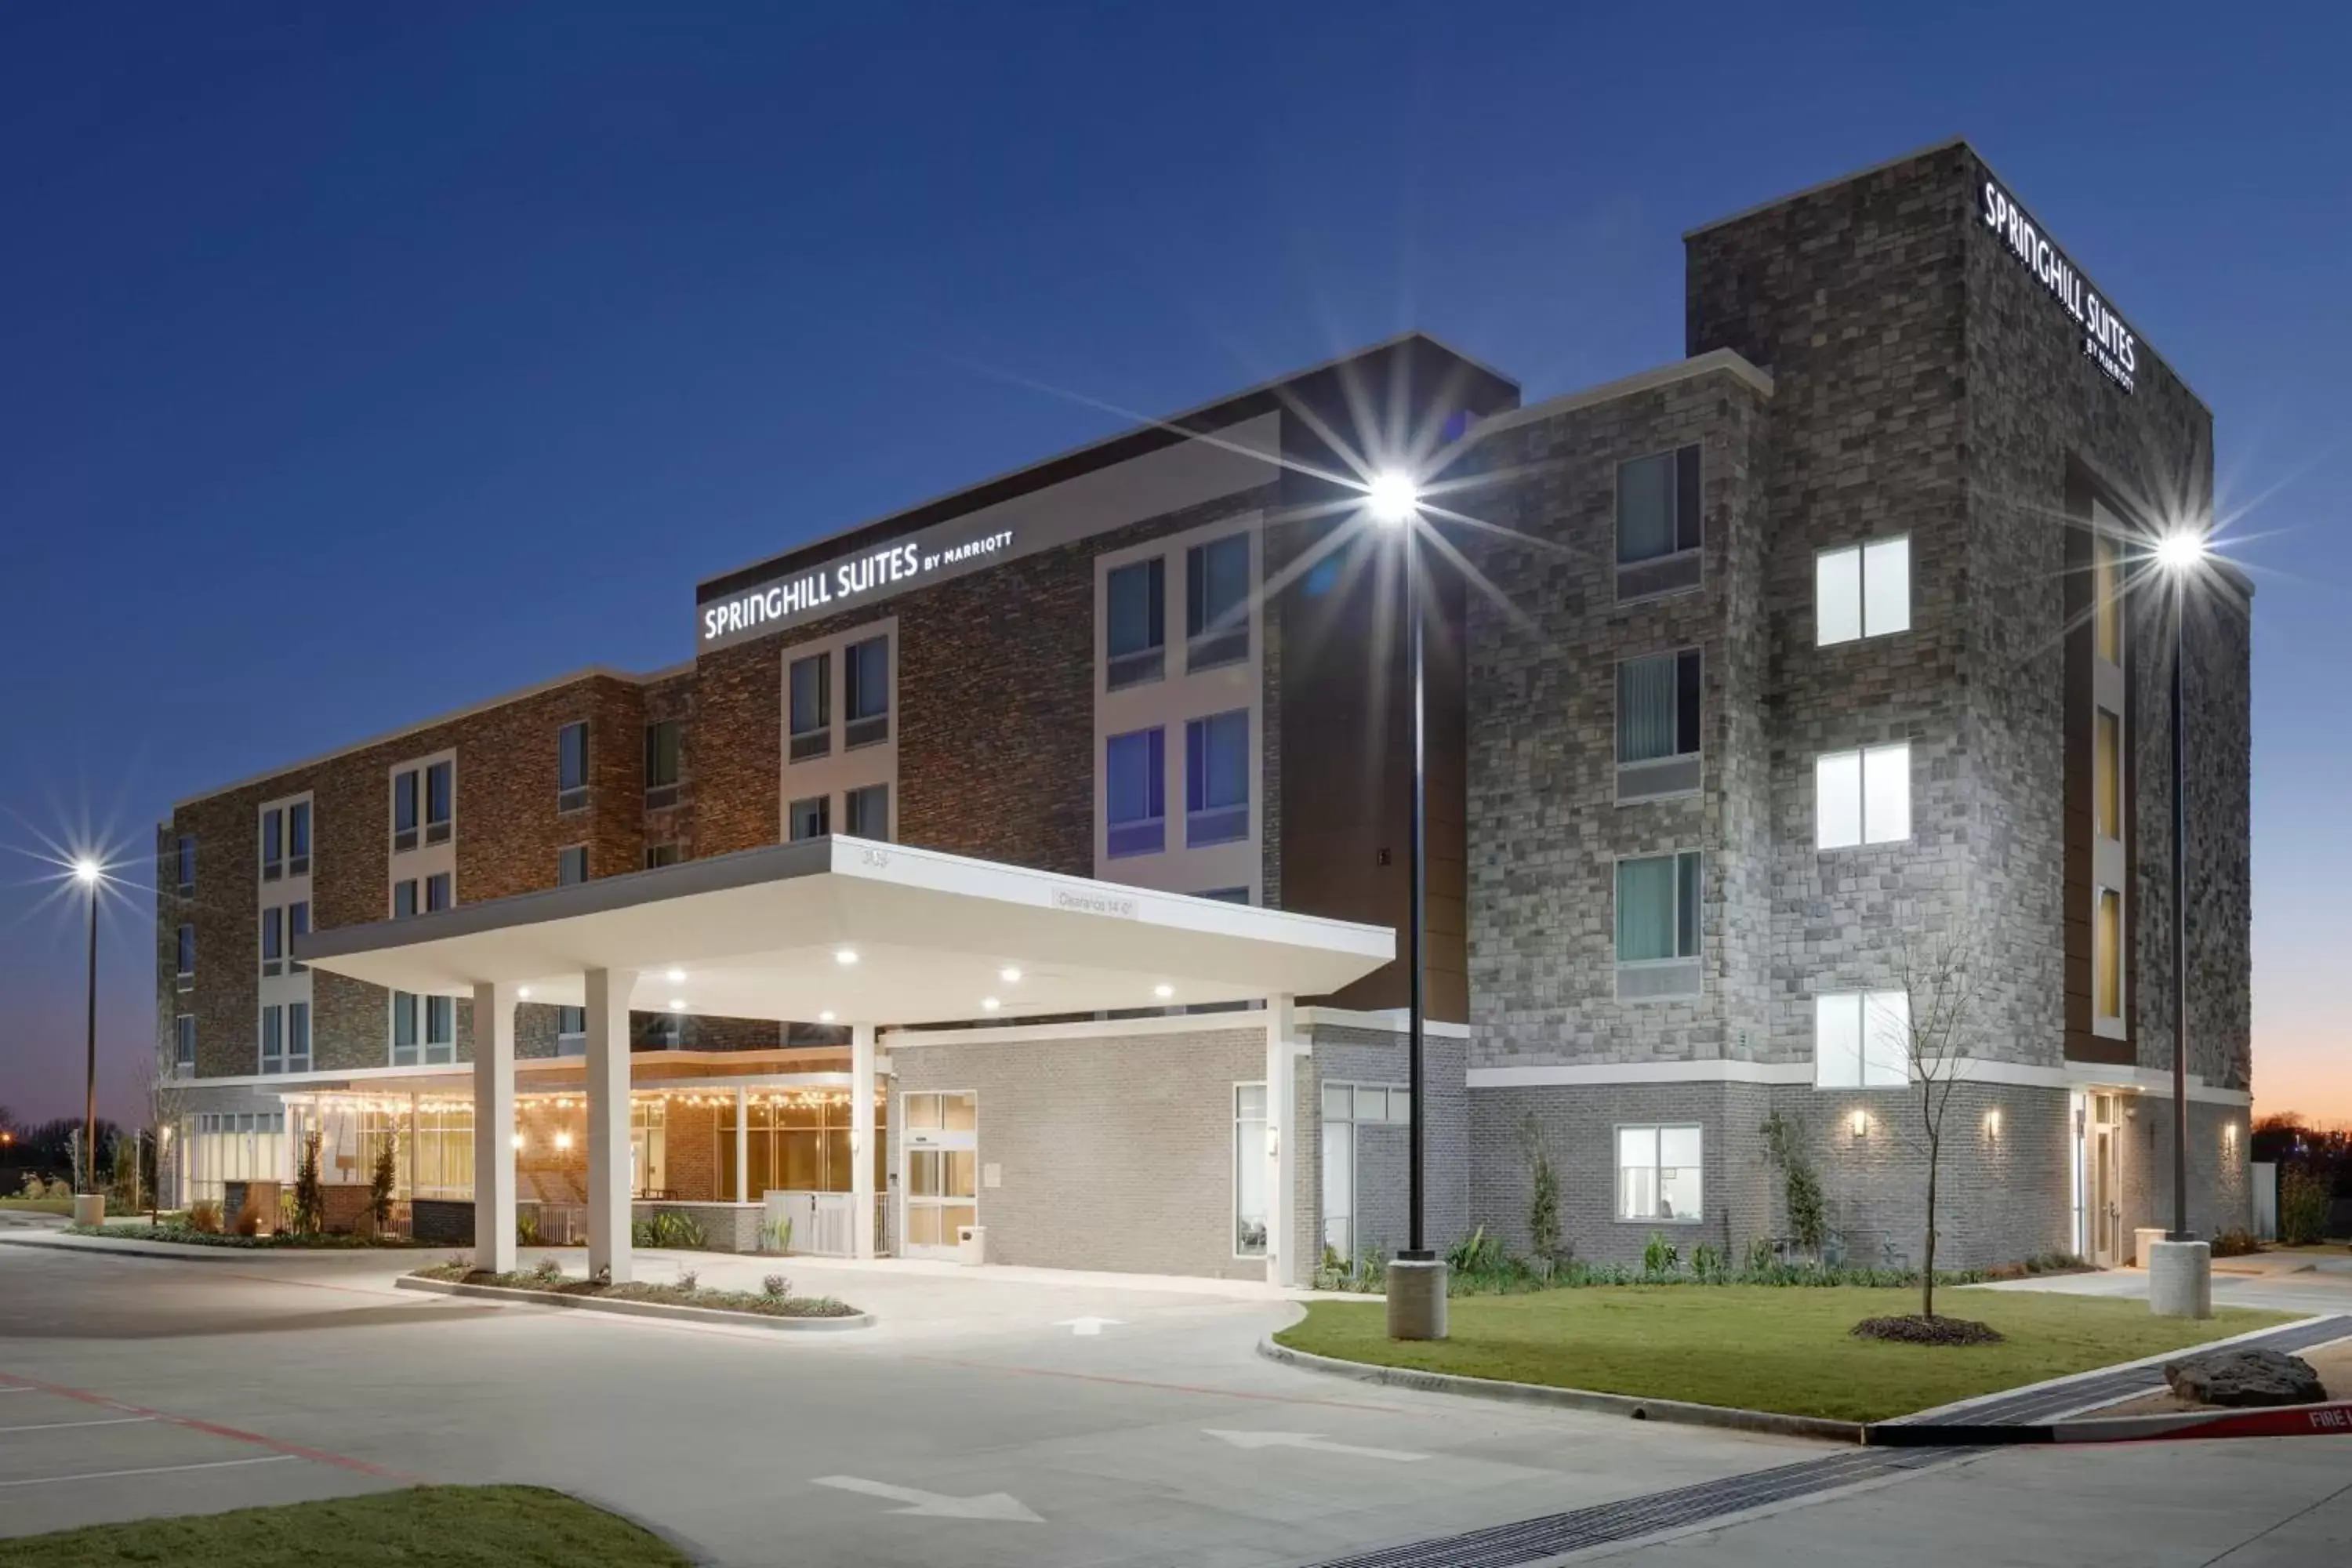 Property Building in SpringHill Suites by Marriott Dallas Mansfield